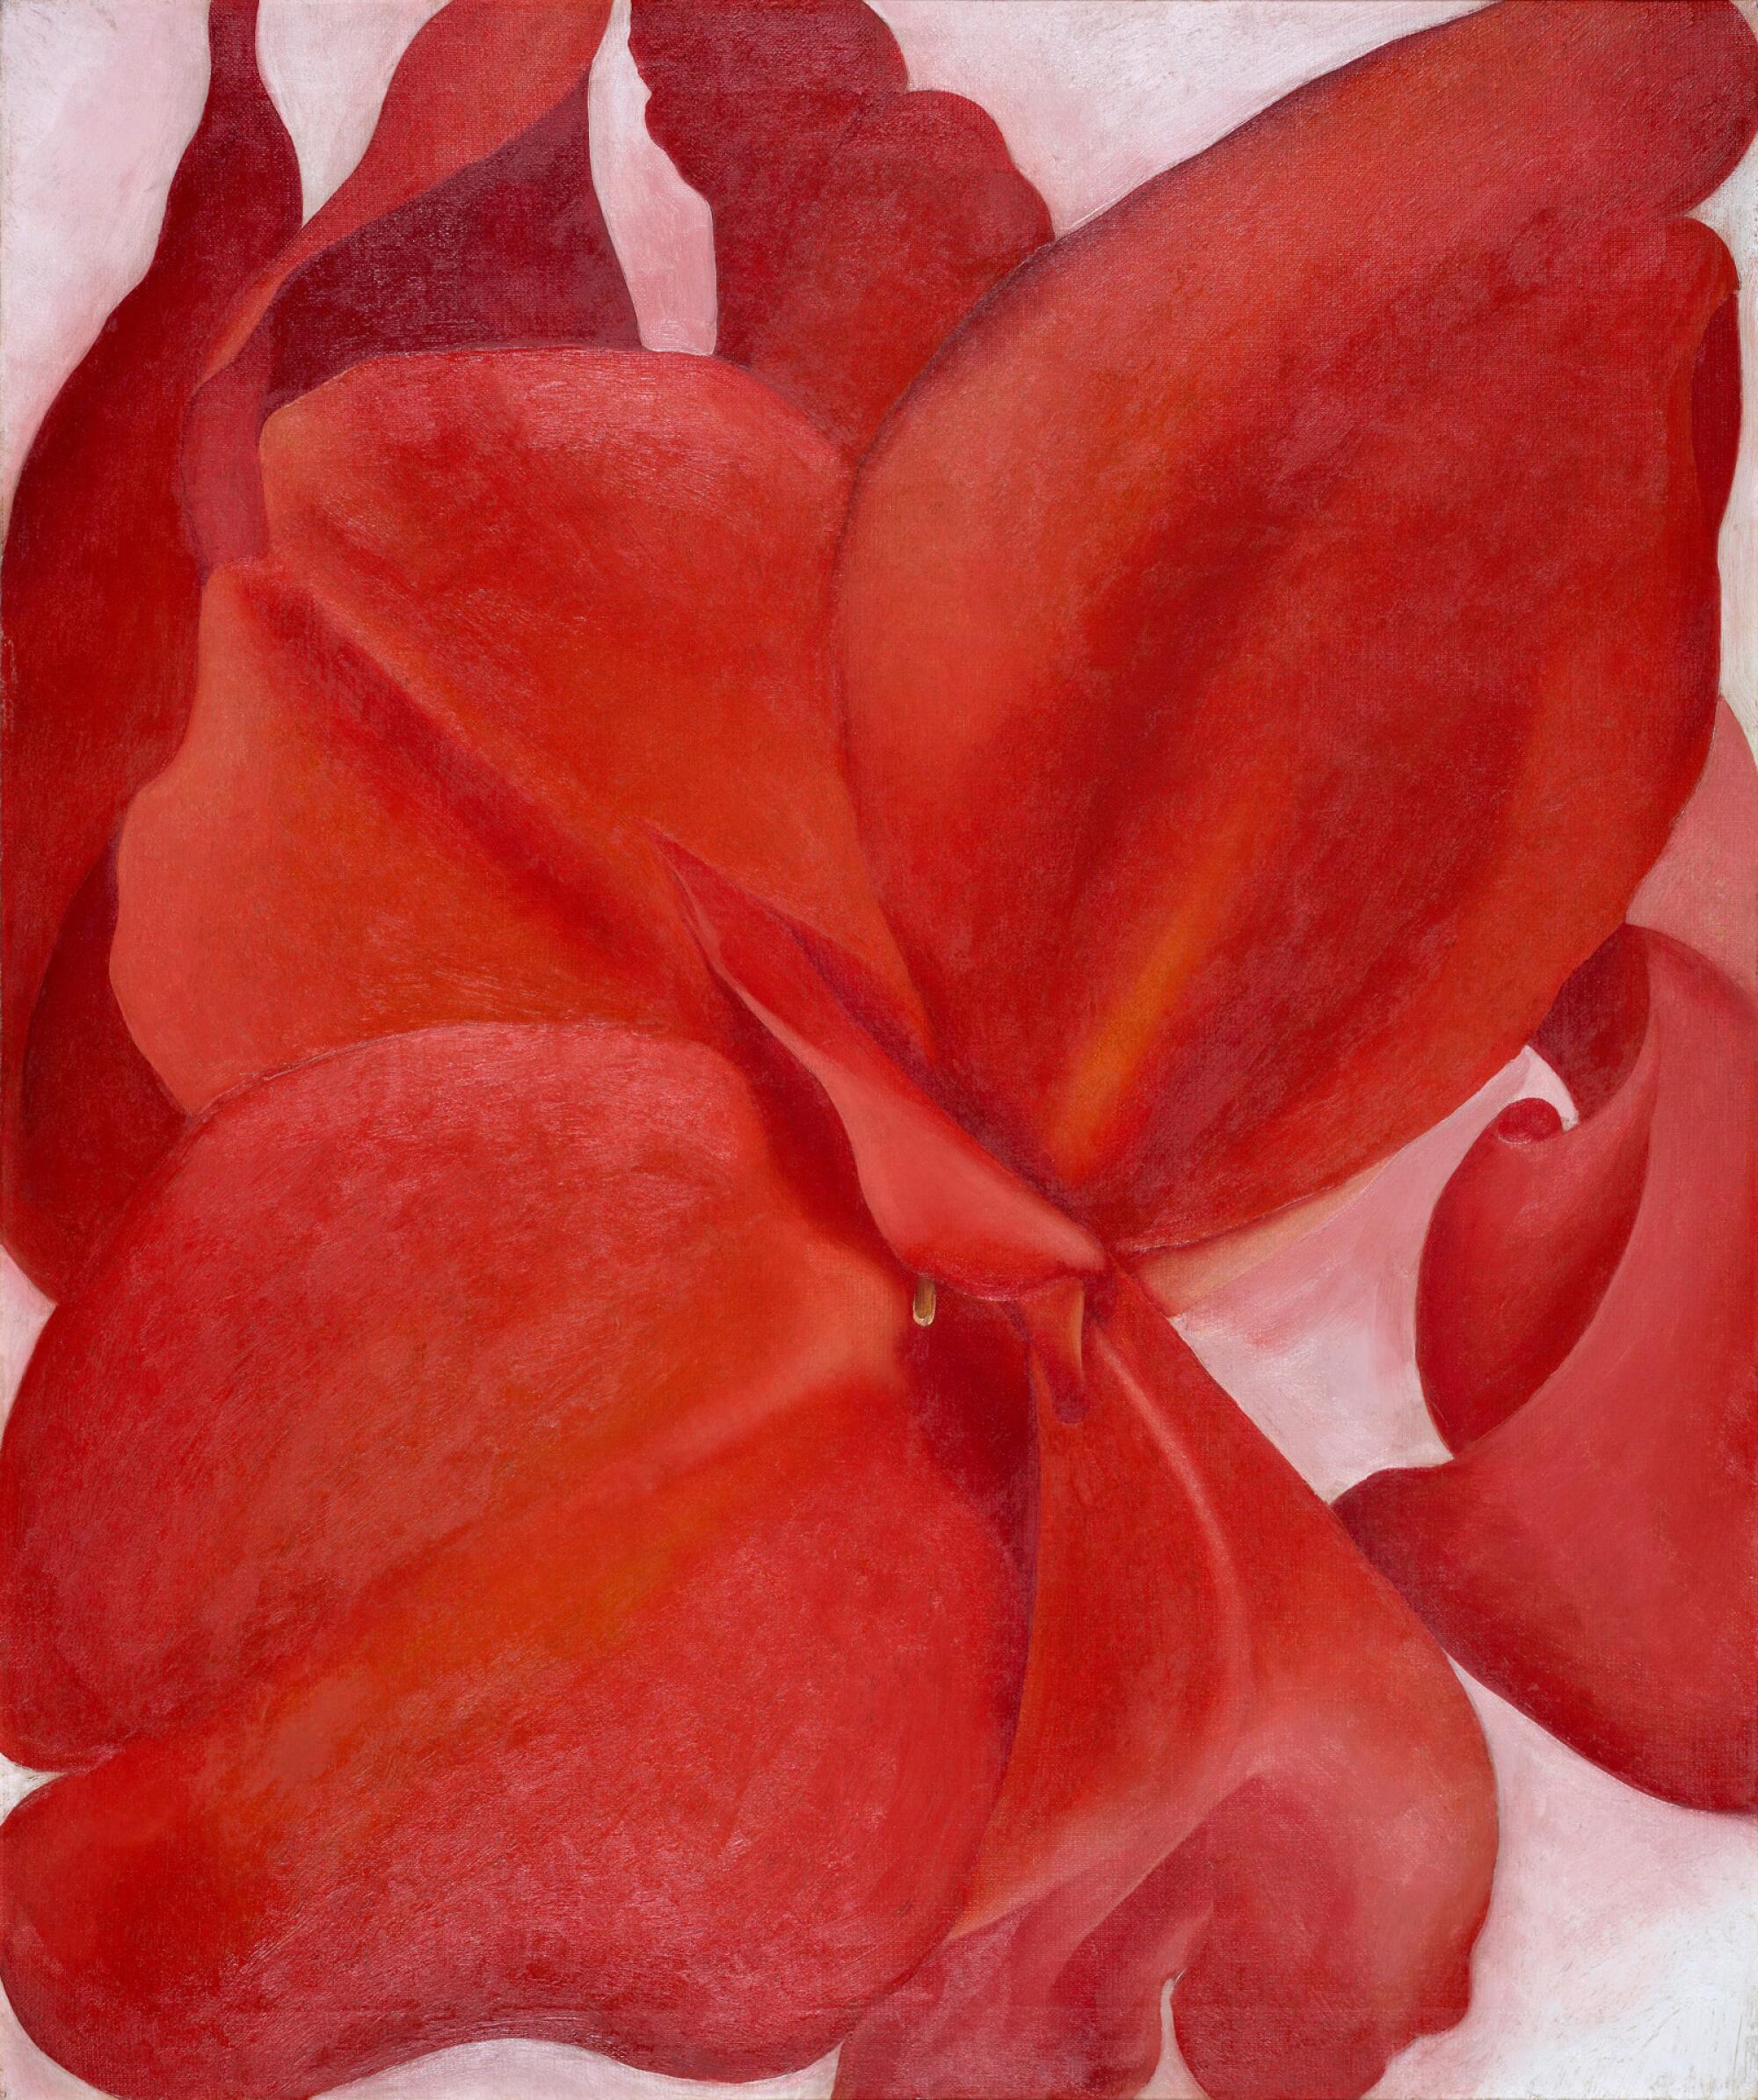 "Red Cannas," a 1927 painting by Georgia O'Keeffe